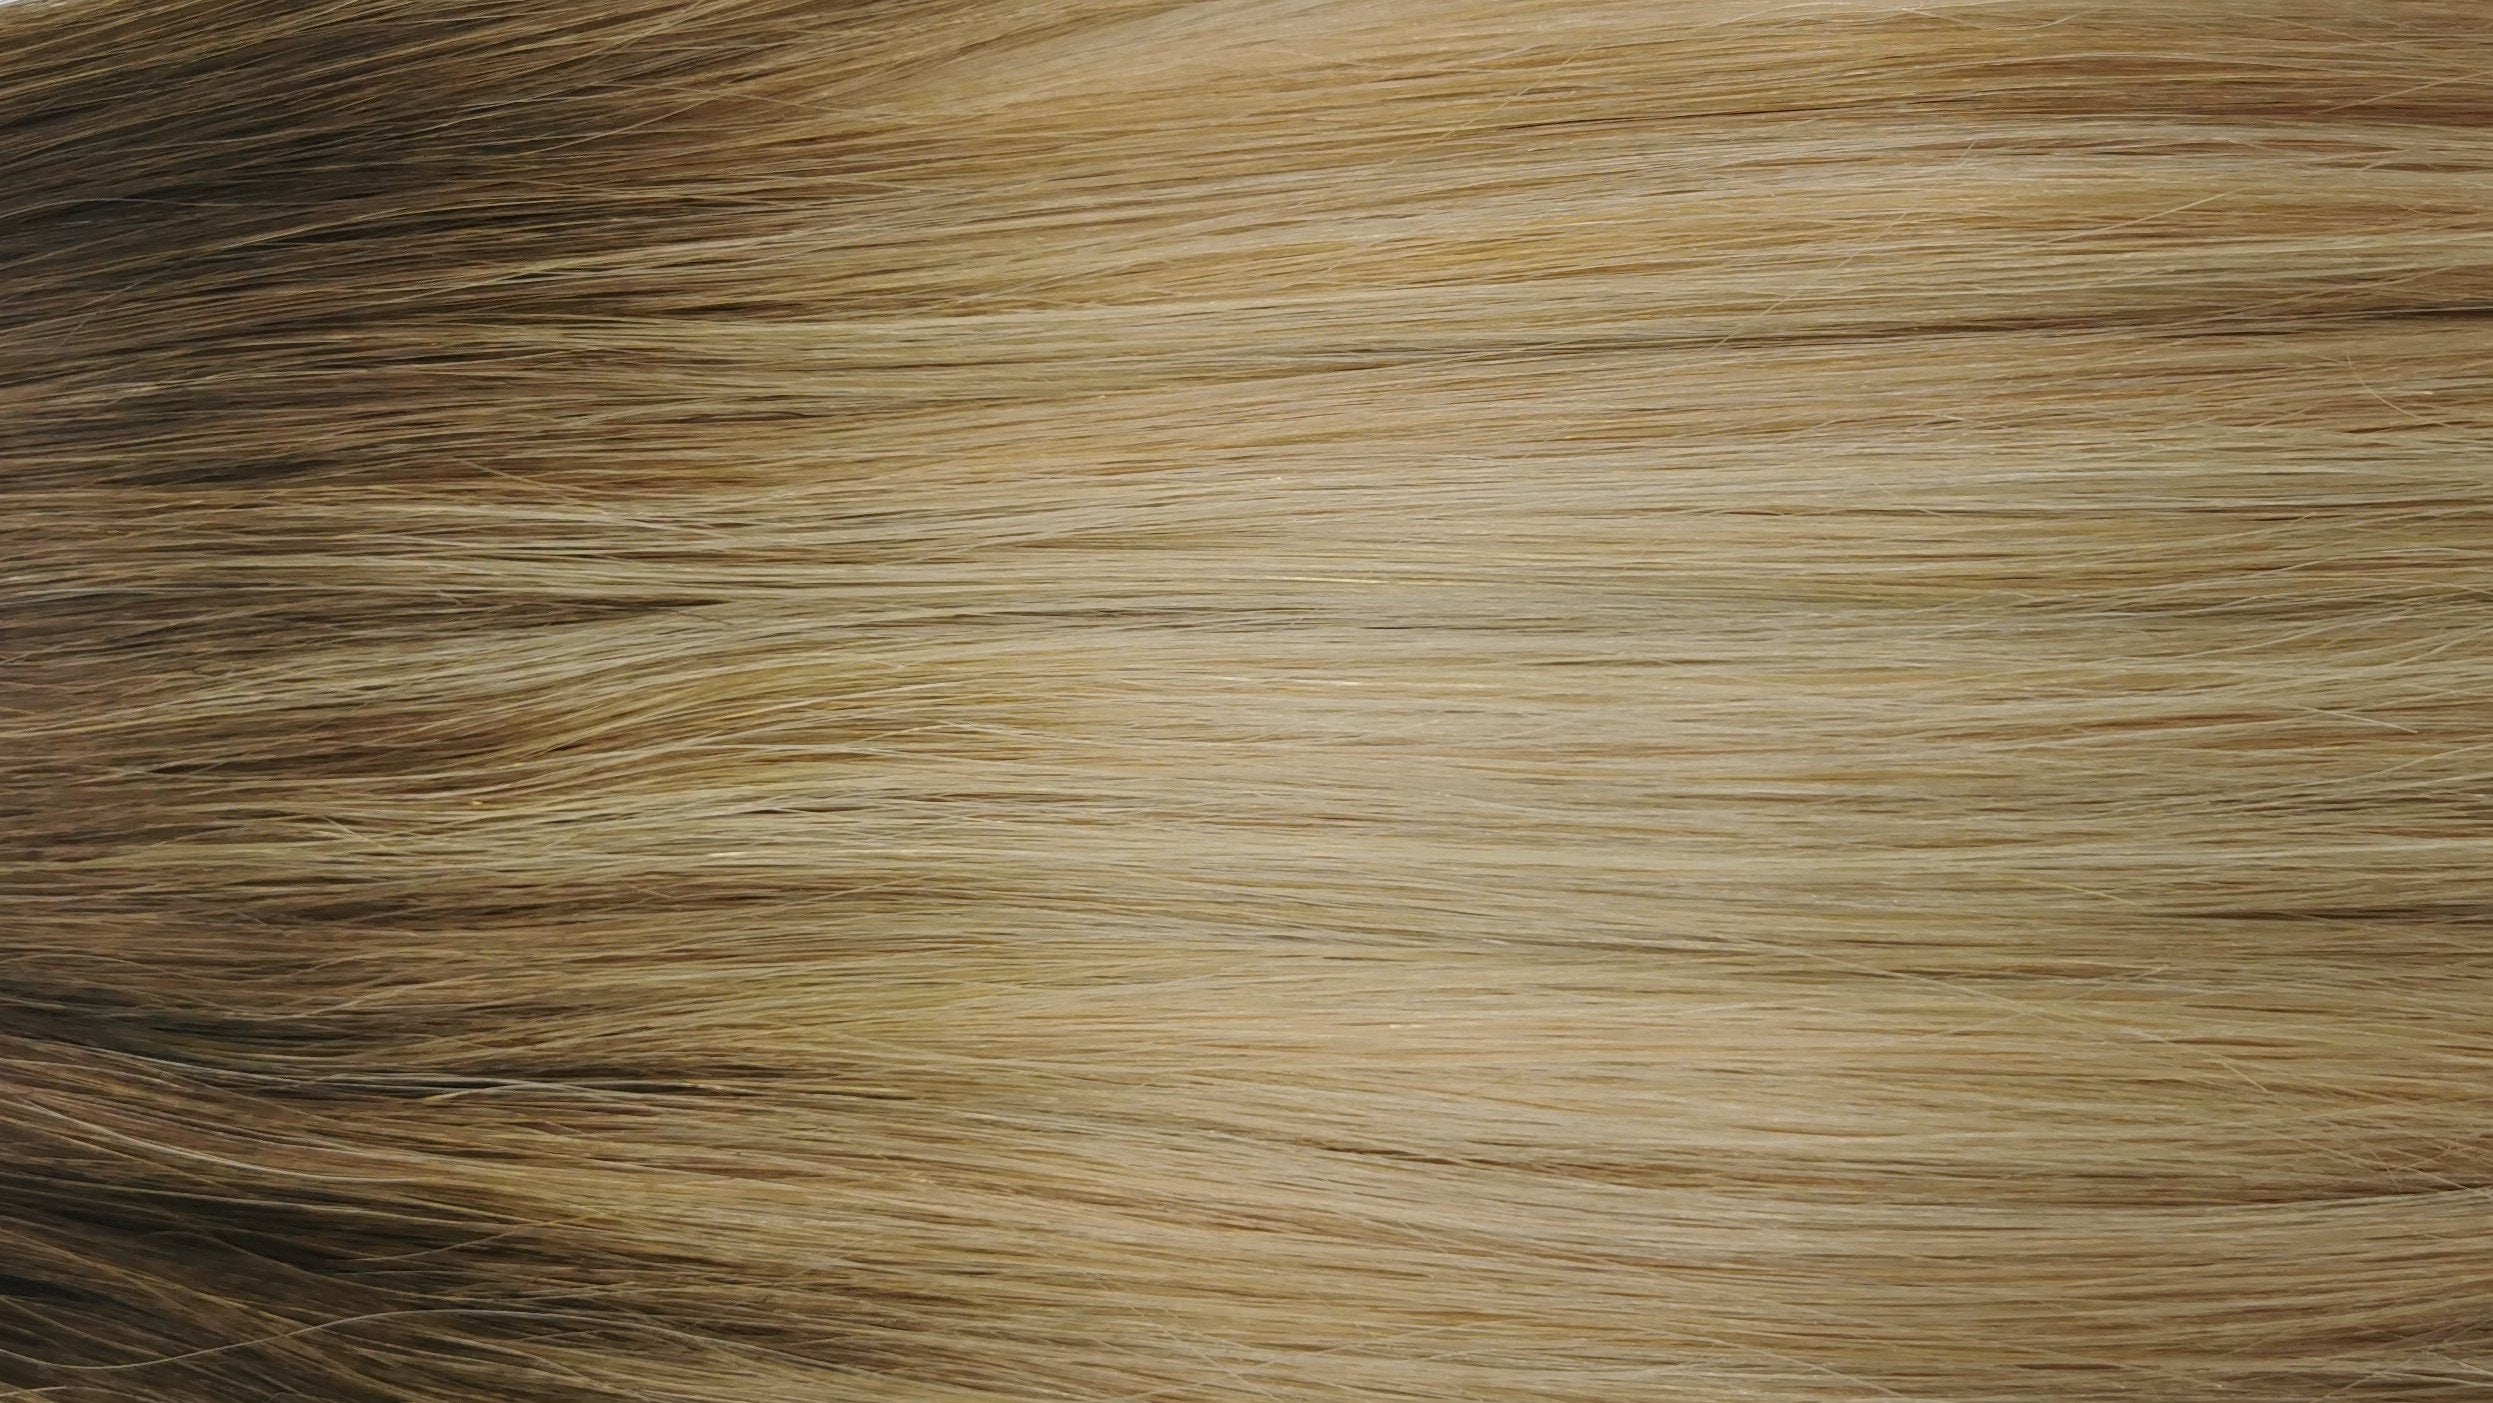 Rania Hand Tied Weft Extensions - Balayage Gold Coast 50g - Creata Beauty - Professional Beauty Products